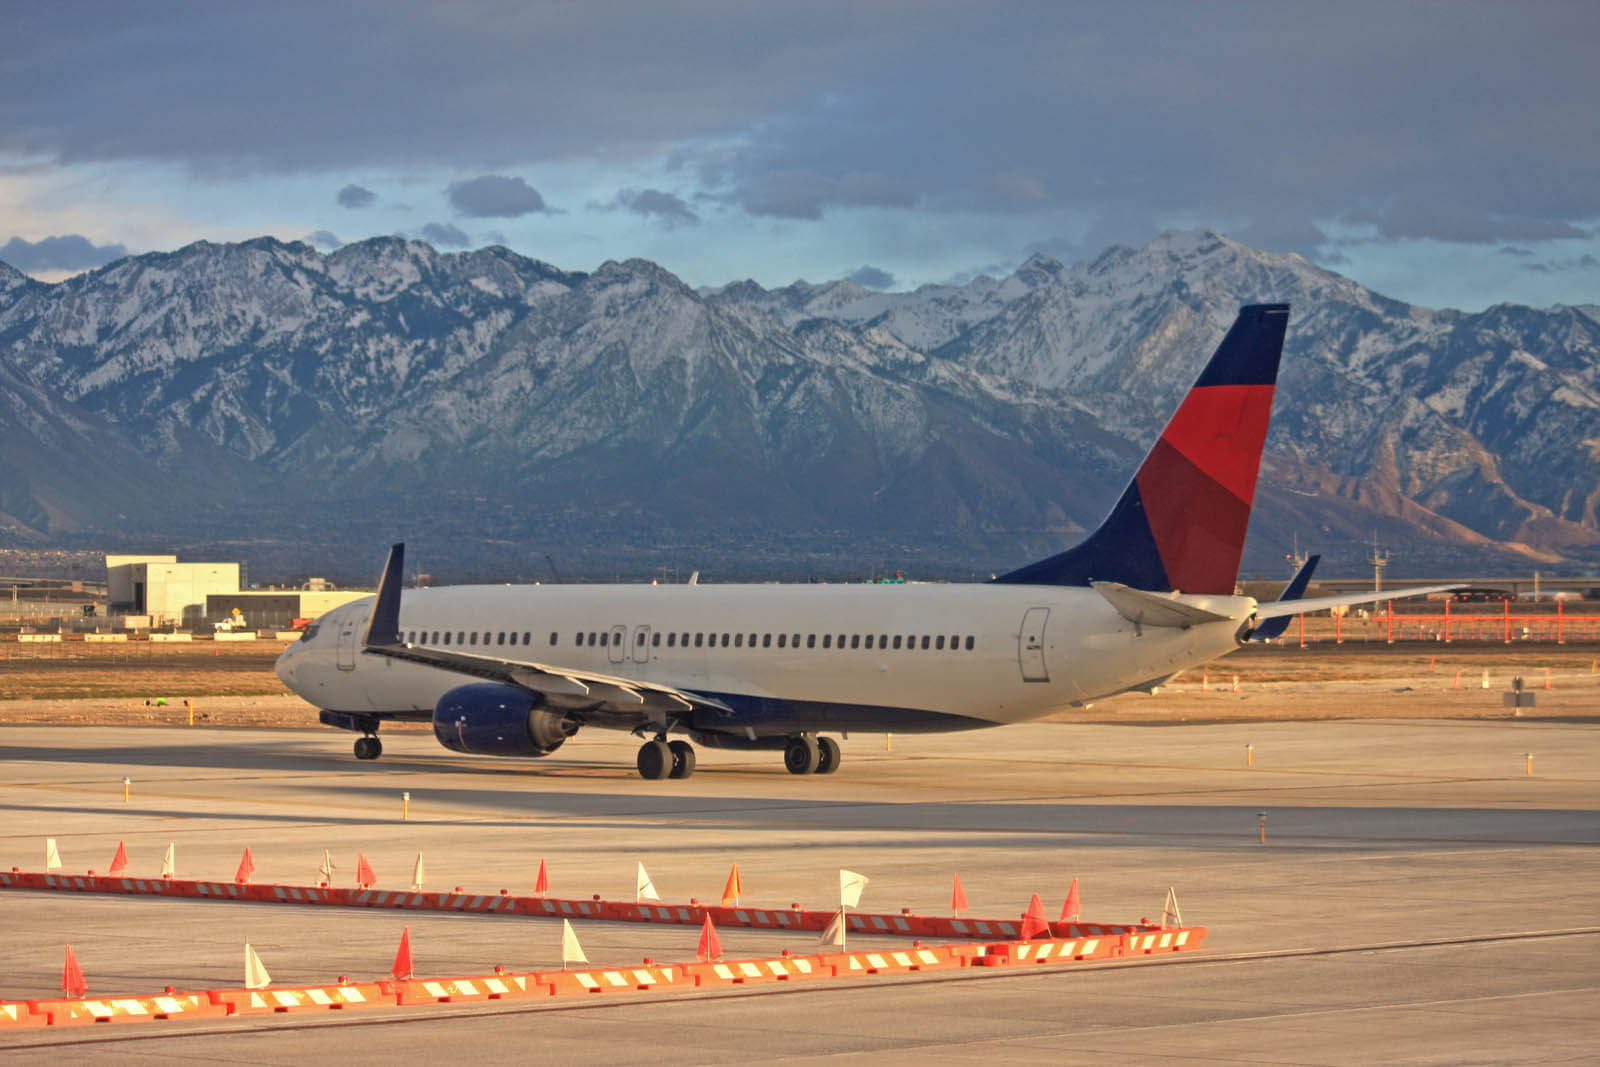 is there an airport shuttle in salt lake city that goes to park city utah?